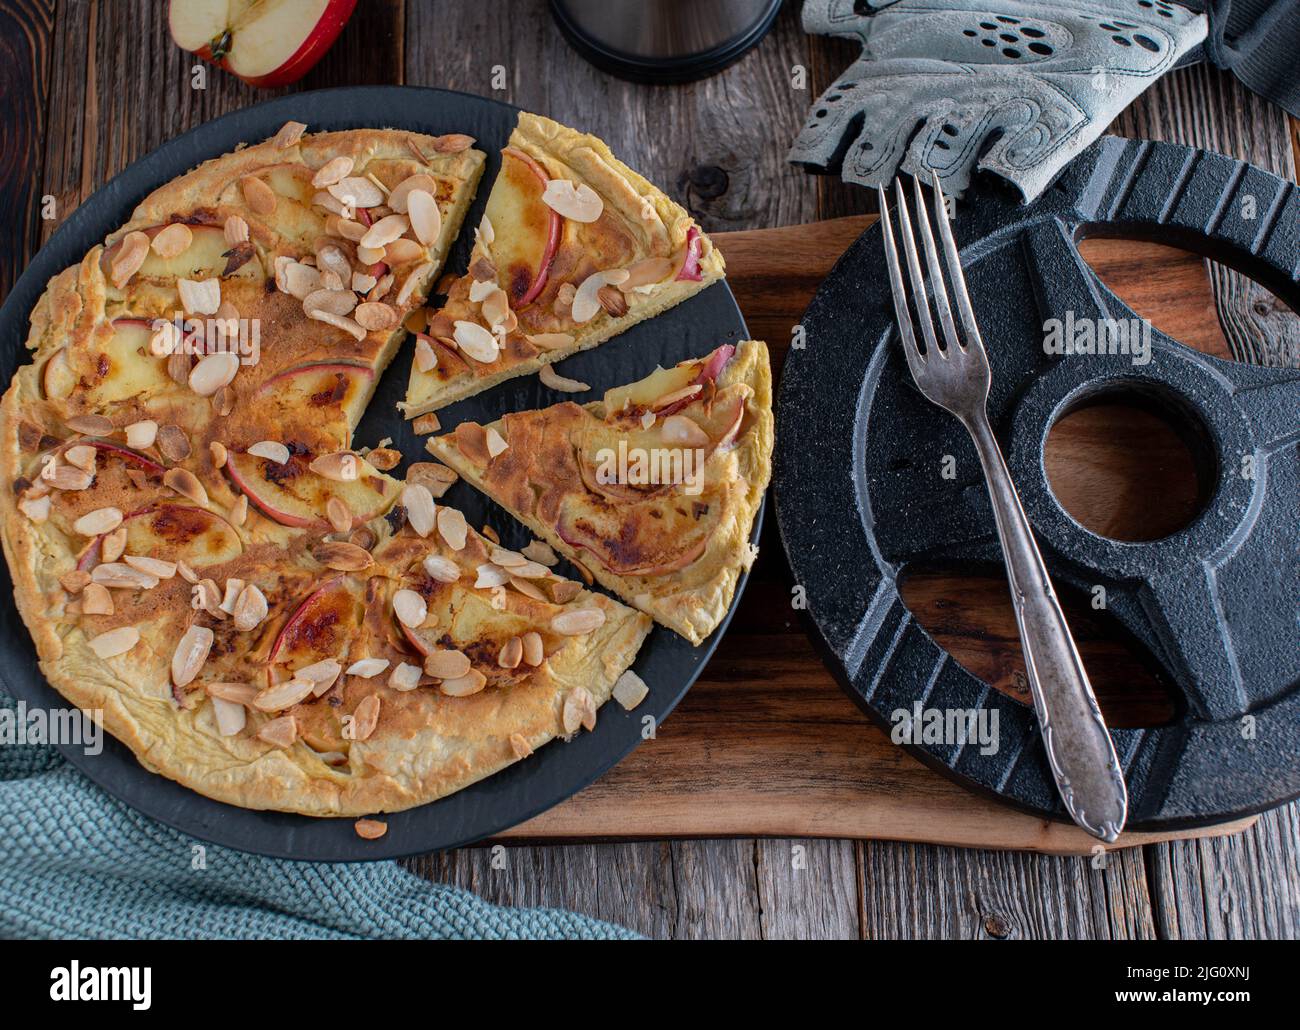 Fitness breakfast with an egg, oatmeal pancake, apples and roasted almonds Stock Photo